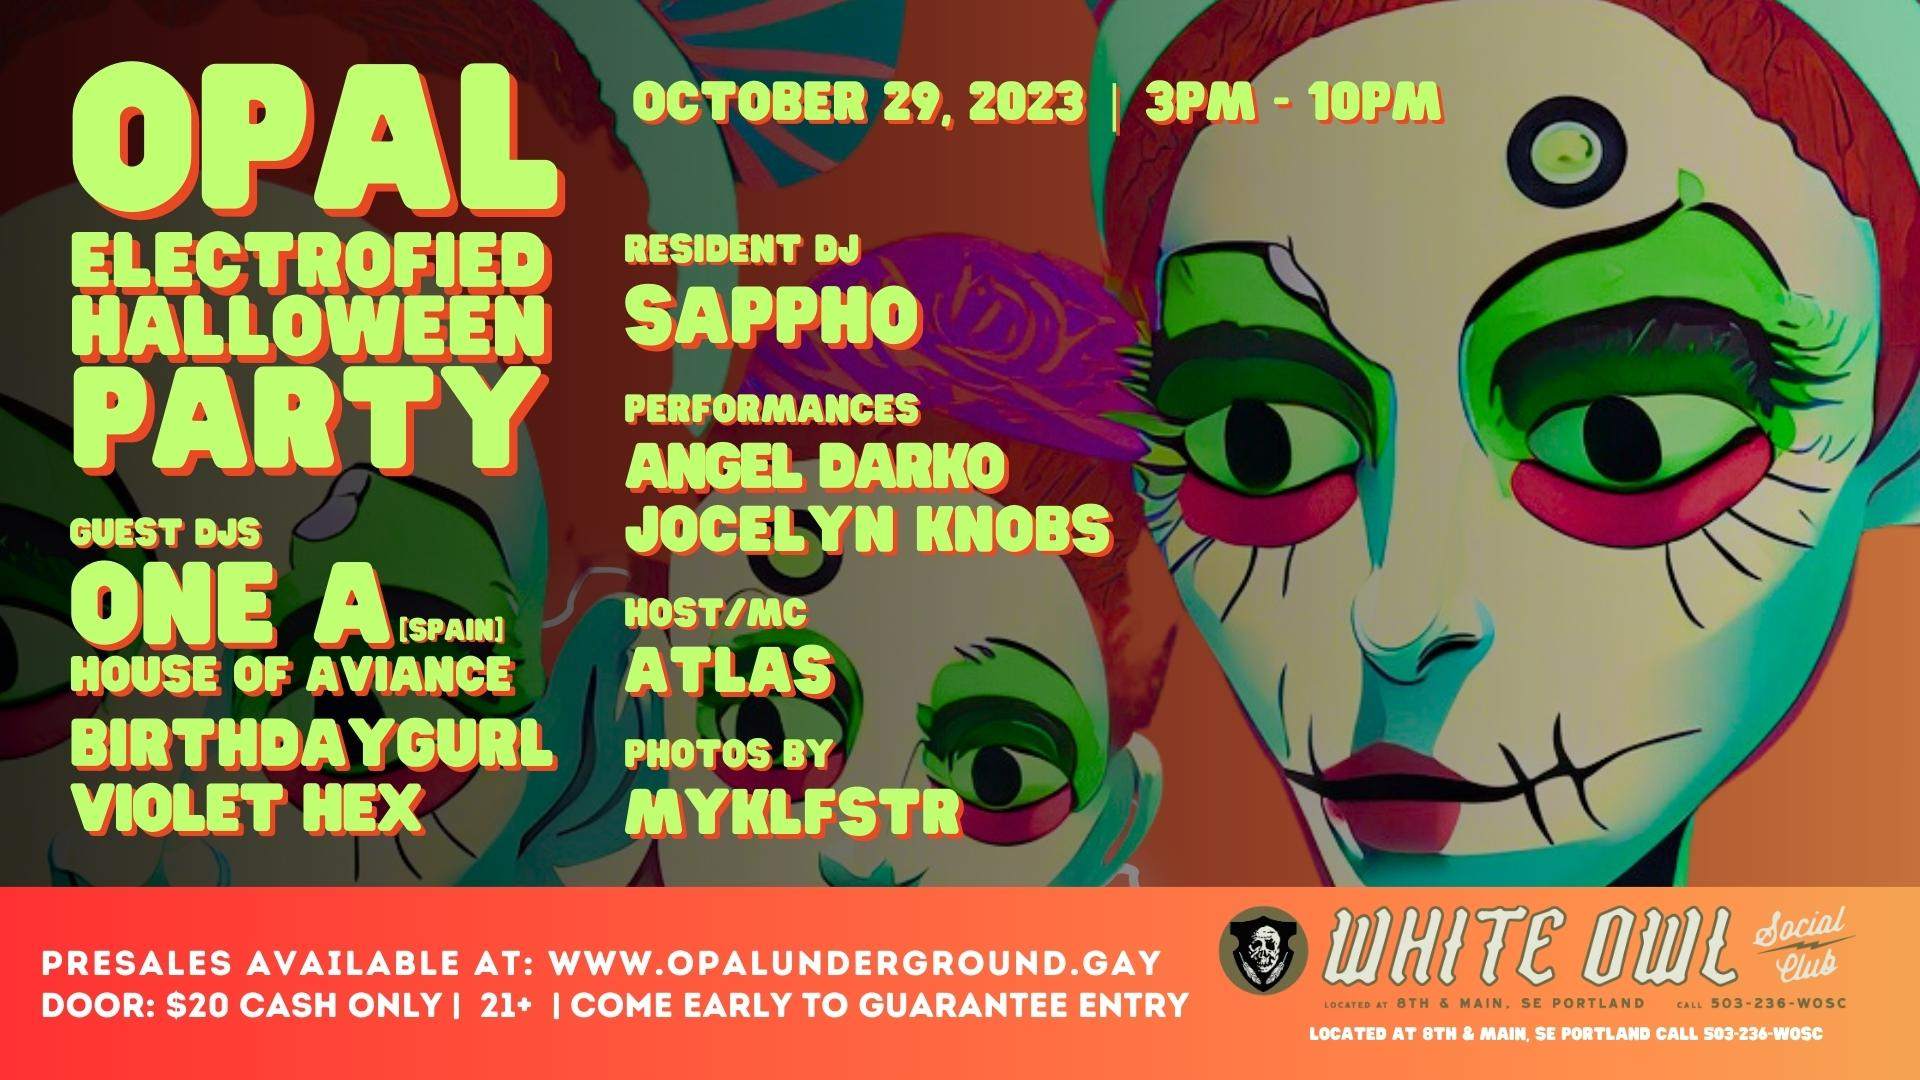 Electrofied Halloween LGBTQ+ Dance Party feat. One A from the House of Aviance - Página frontal